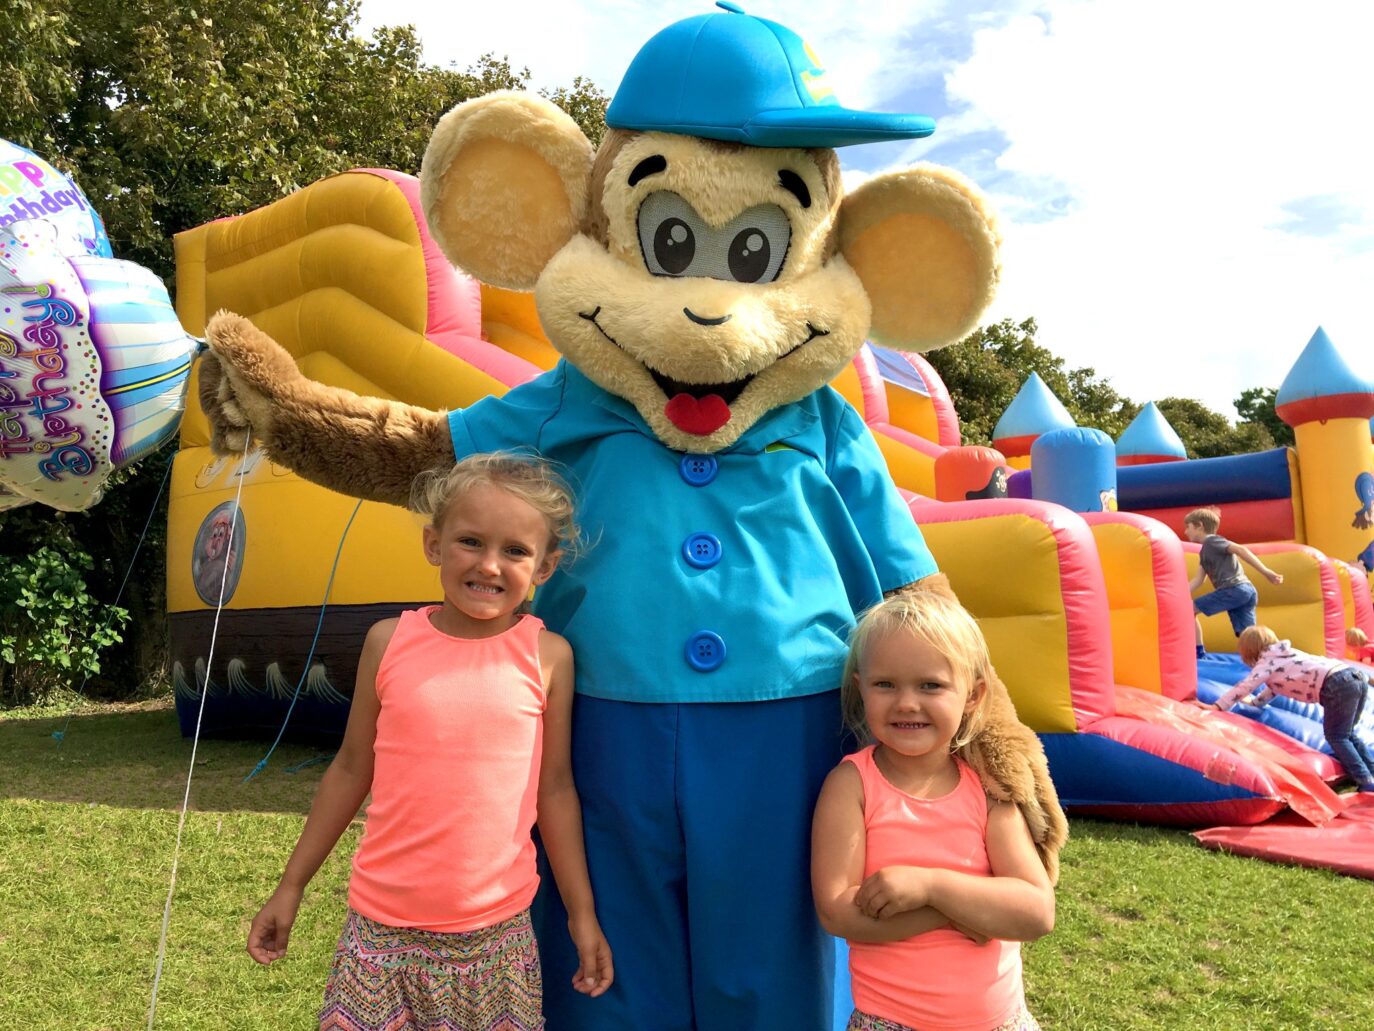 A person in a cartoonish mouse costume stands with two young girls at an outdoor birthday party at Monkey Tree Holiday Park in Cornwall, with a colorful inflatable bounce house in the background. The mouse is holding